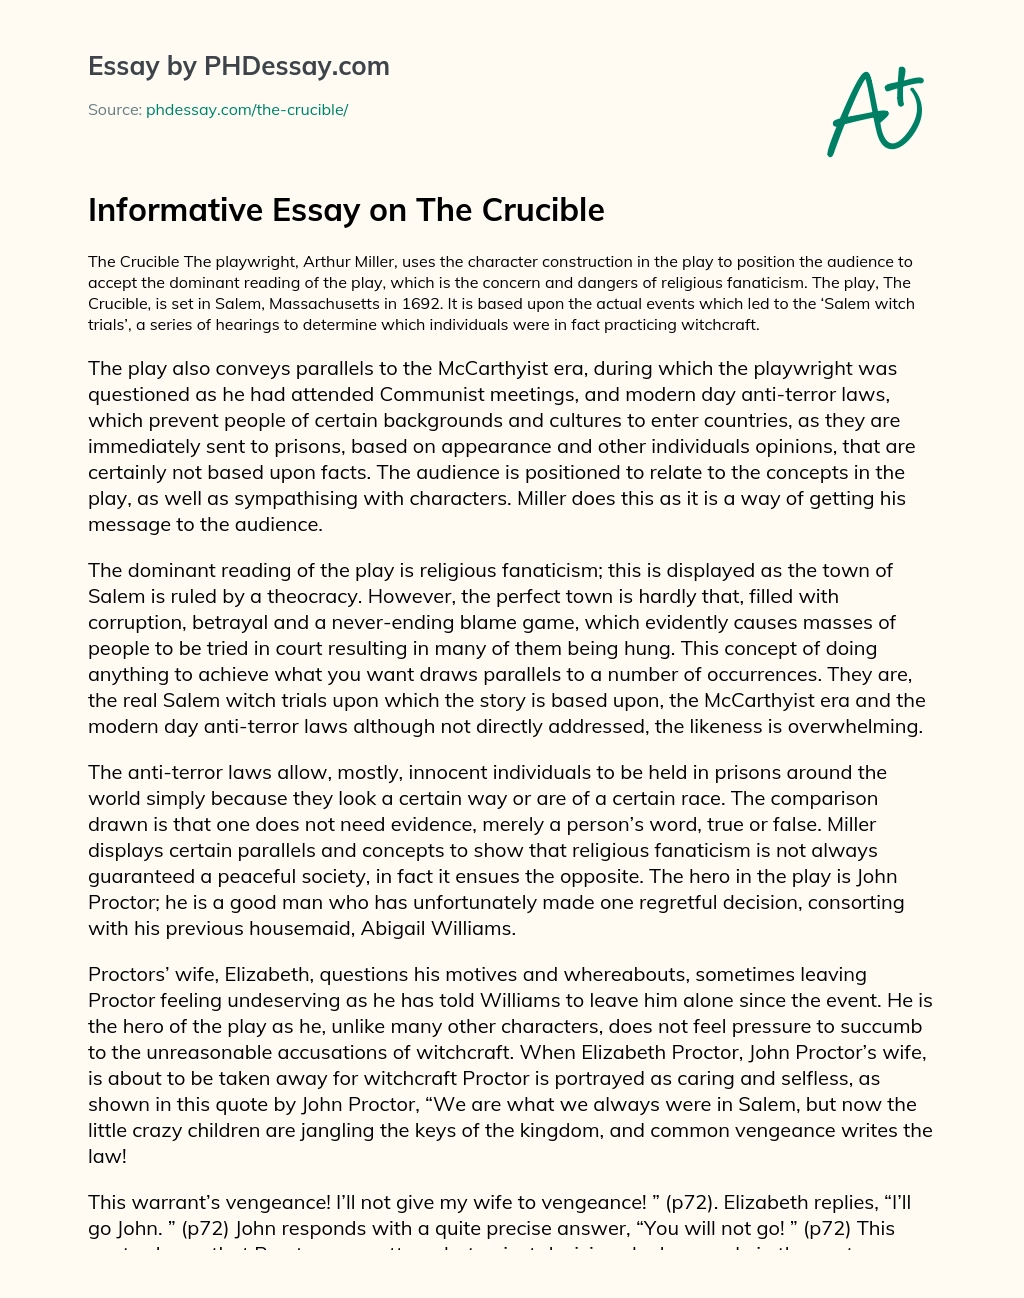 the crucible essay introduction